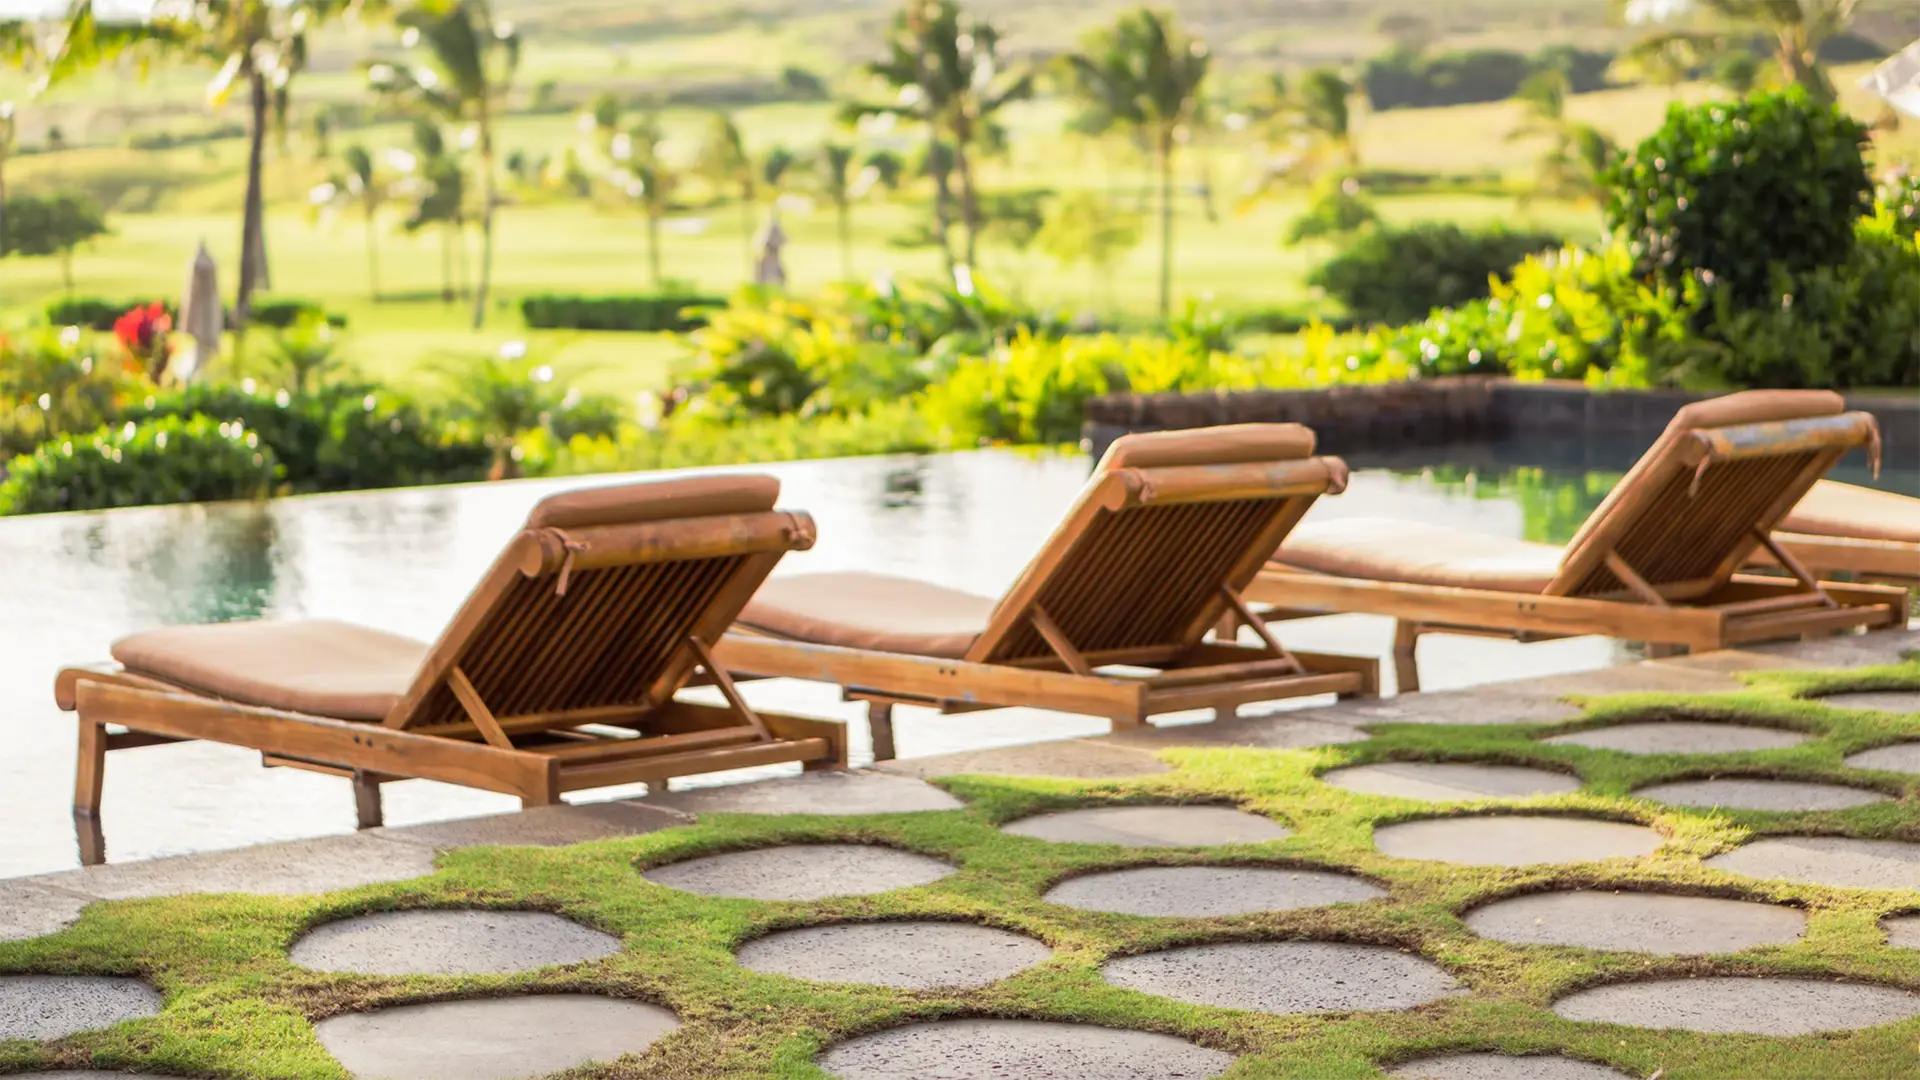 Two wooden lounge chairs with brown cushions face an infinity pool overlooking a lush, green landscape with palm trees. Circular stone pavers are set in the grass leading up to the pool area, creating a serene and relaxing outdoor environment reminiscent of the best spa hotels Kauai has to offer.